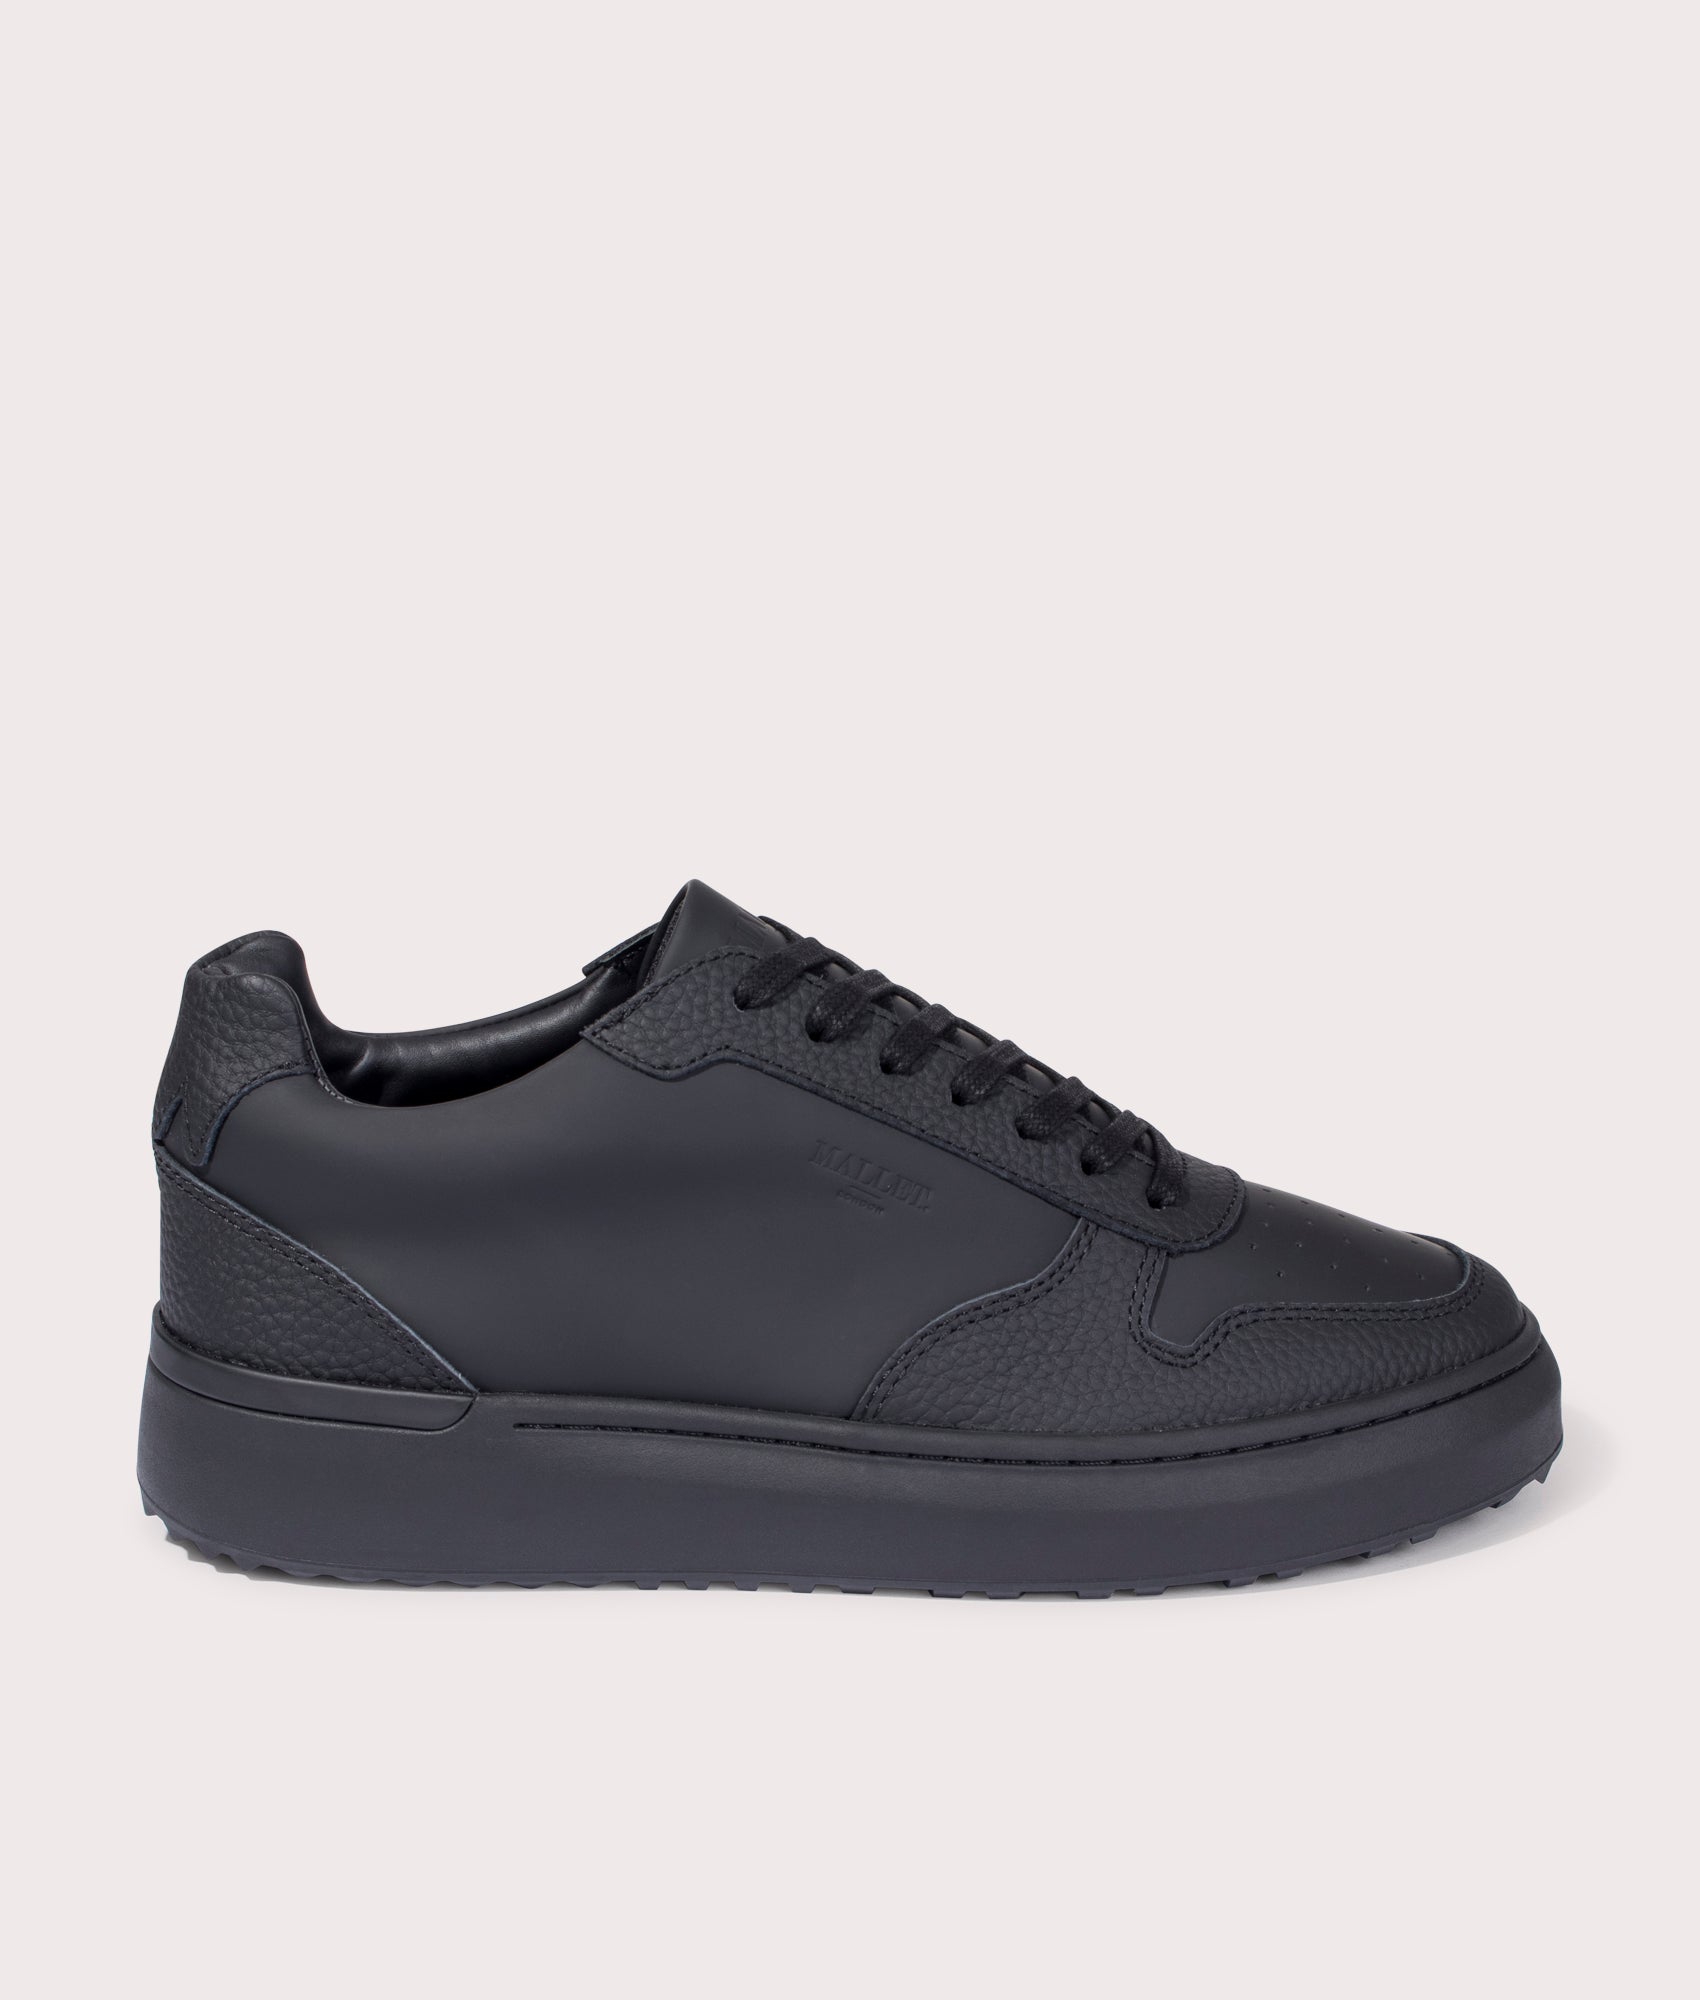 Mallet Mens Hoxton 2.0 Sneakers - Colour: TMBMDN Tumbled Midnight - Size: 8